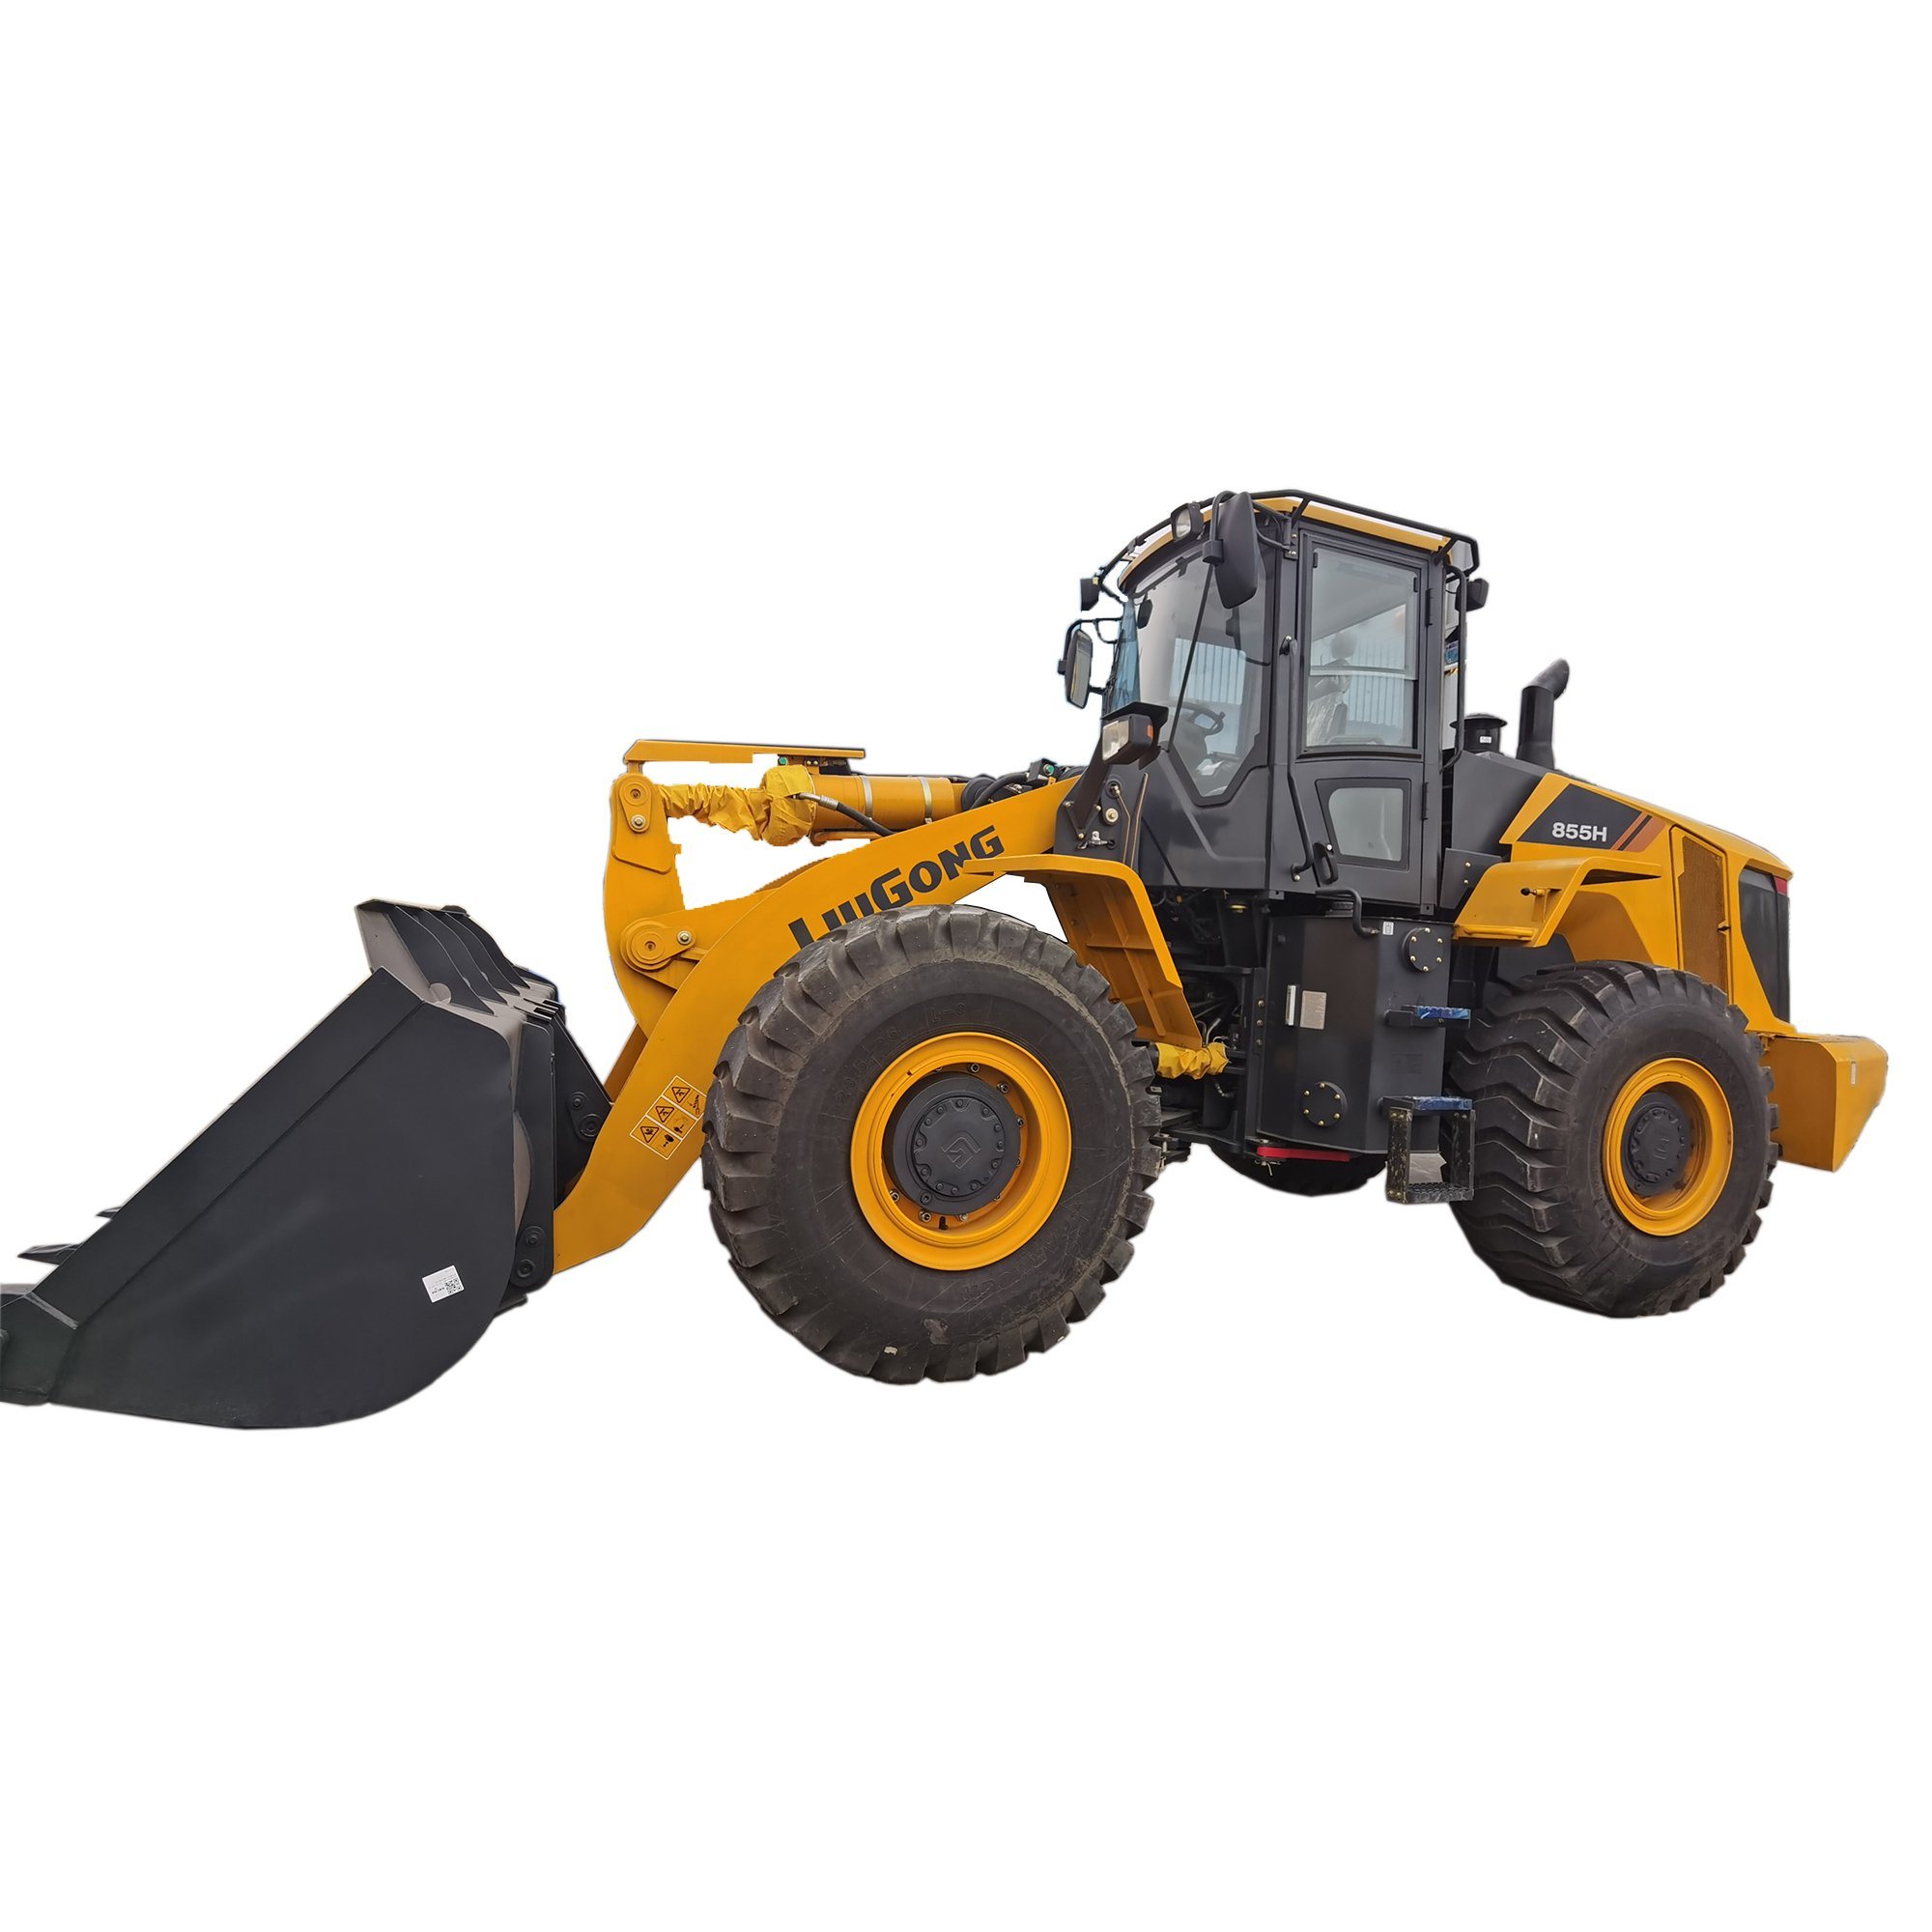 Clg855h Most Hot Sale 5 Ton Wheel Loader with Cheap Price